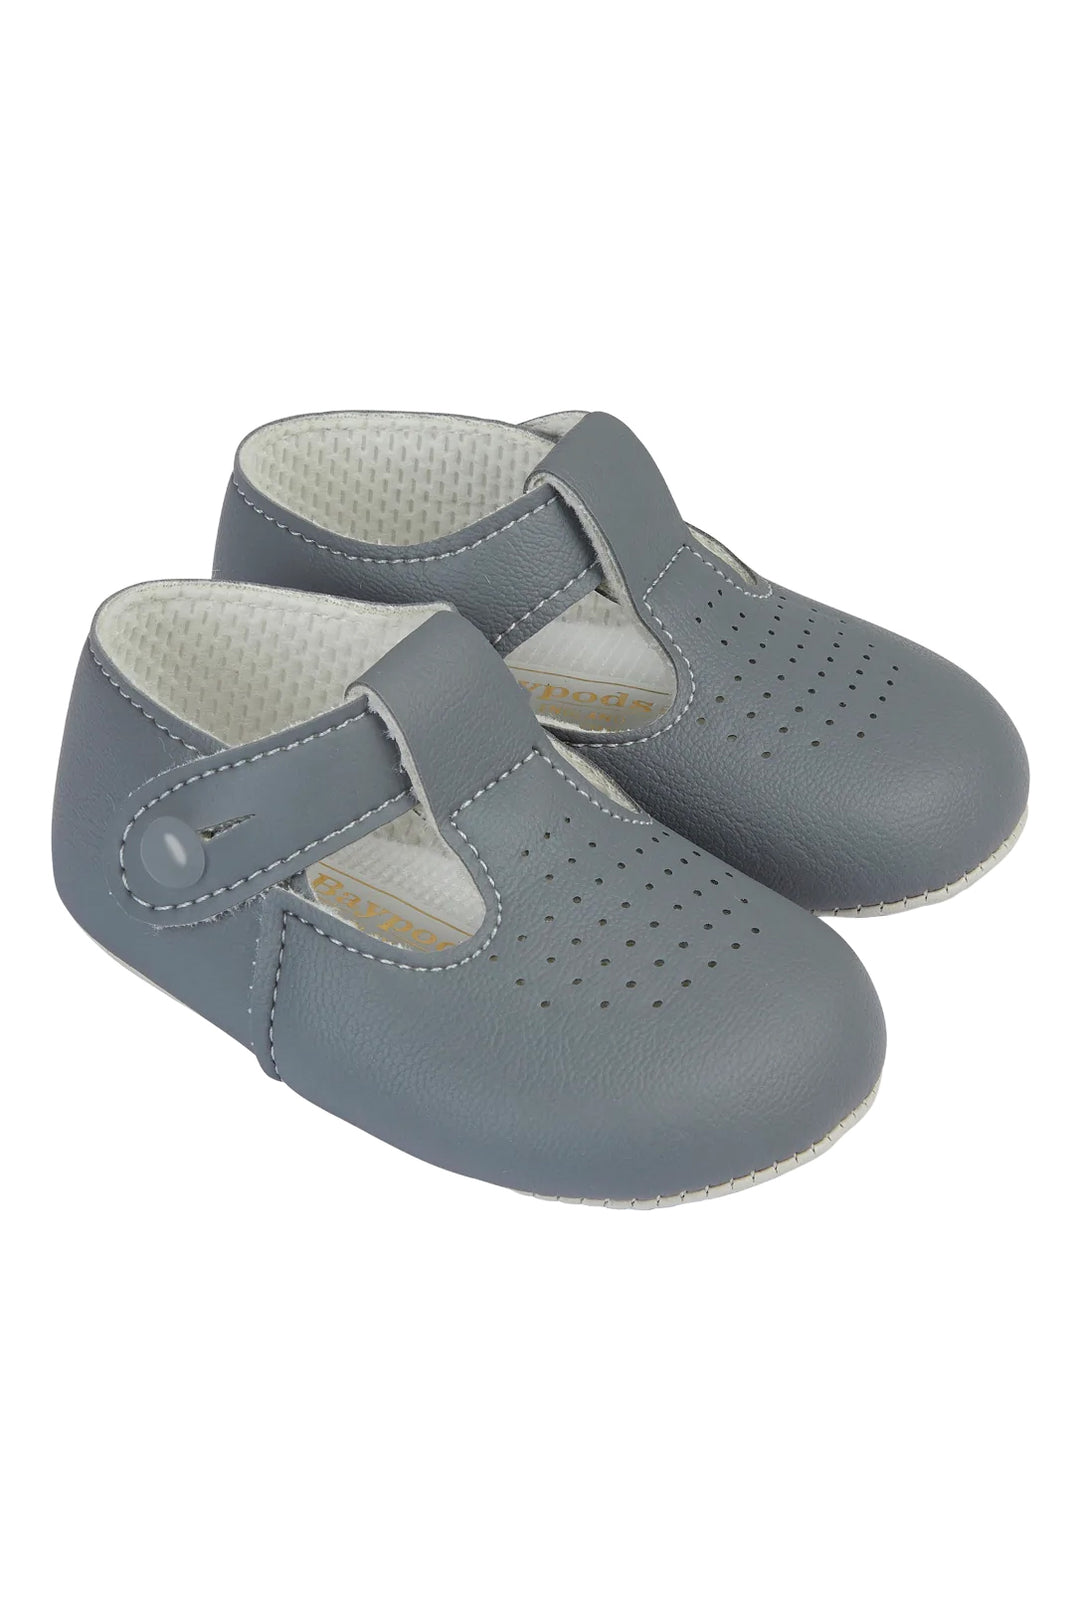 Baypods Grey T-Bar Soft Sole Shoes | Millie and John